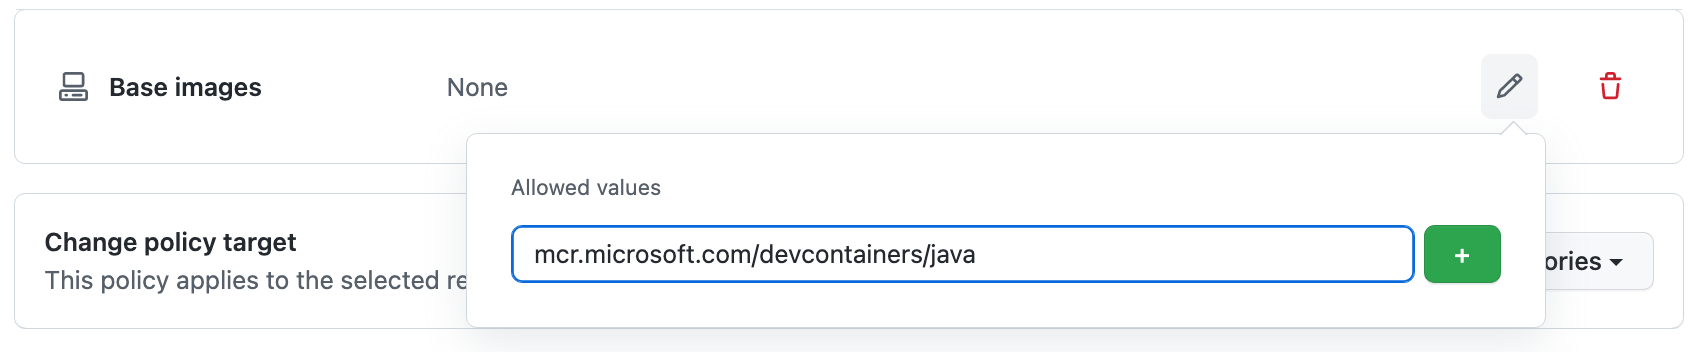 Screenshot of the image reference "mcr.microsoft.com/devcontainers/java" entered in the "Allowed values" field.